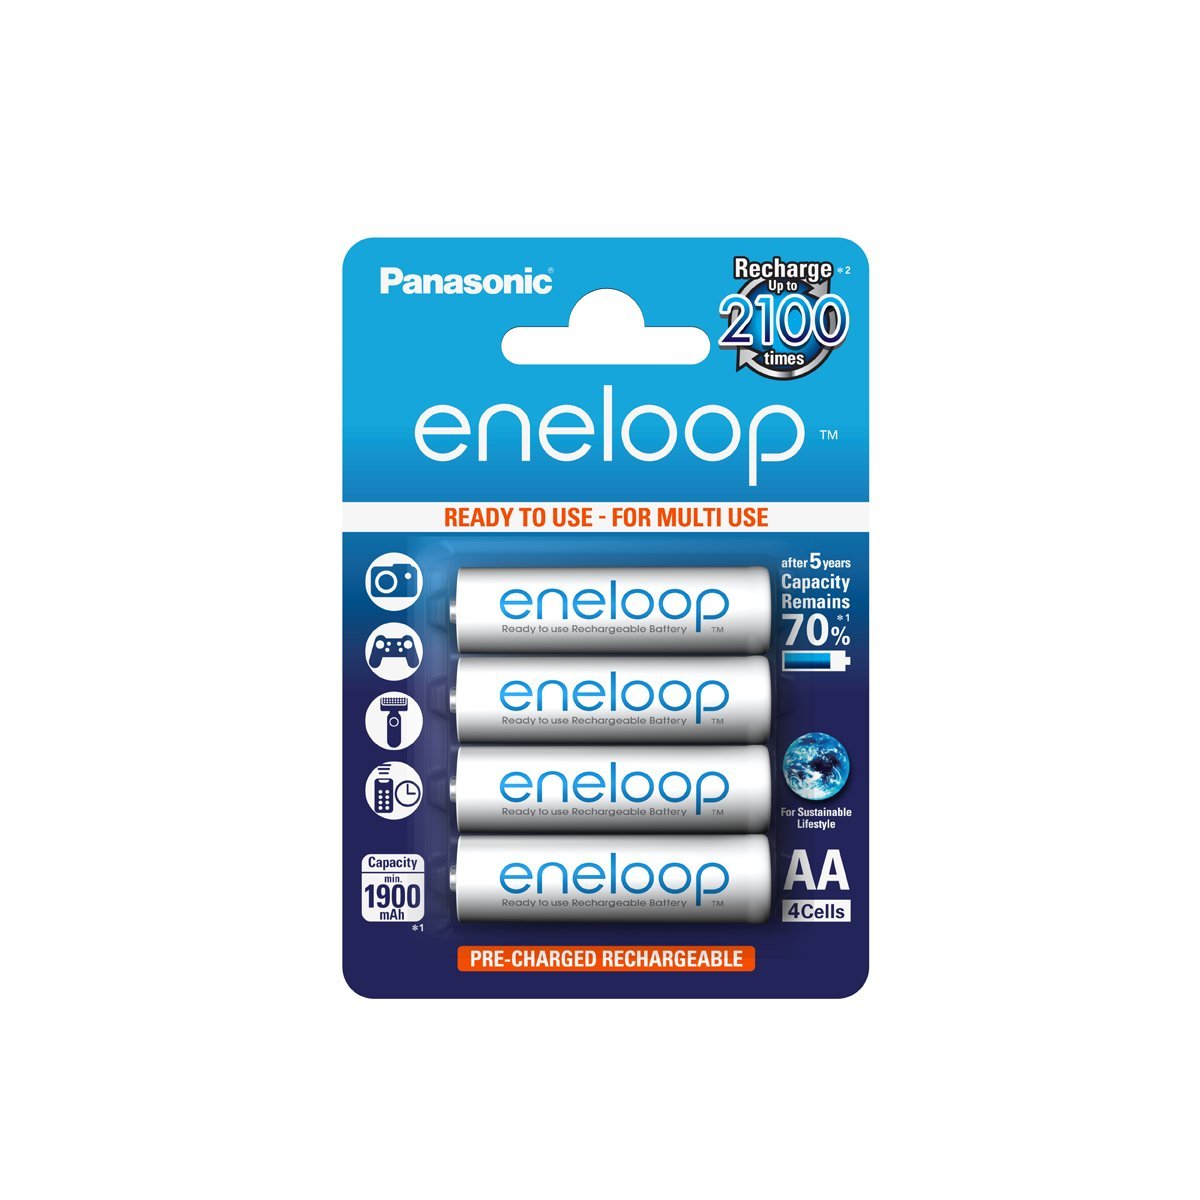 Panasonic Eneloop AA HR06 Ni-Mh Rechargeable Batteries 1900mAh Capacity Ready to Use - 4 Pack